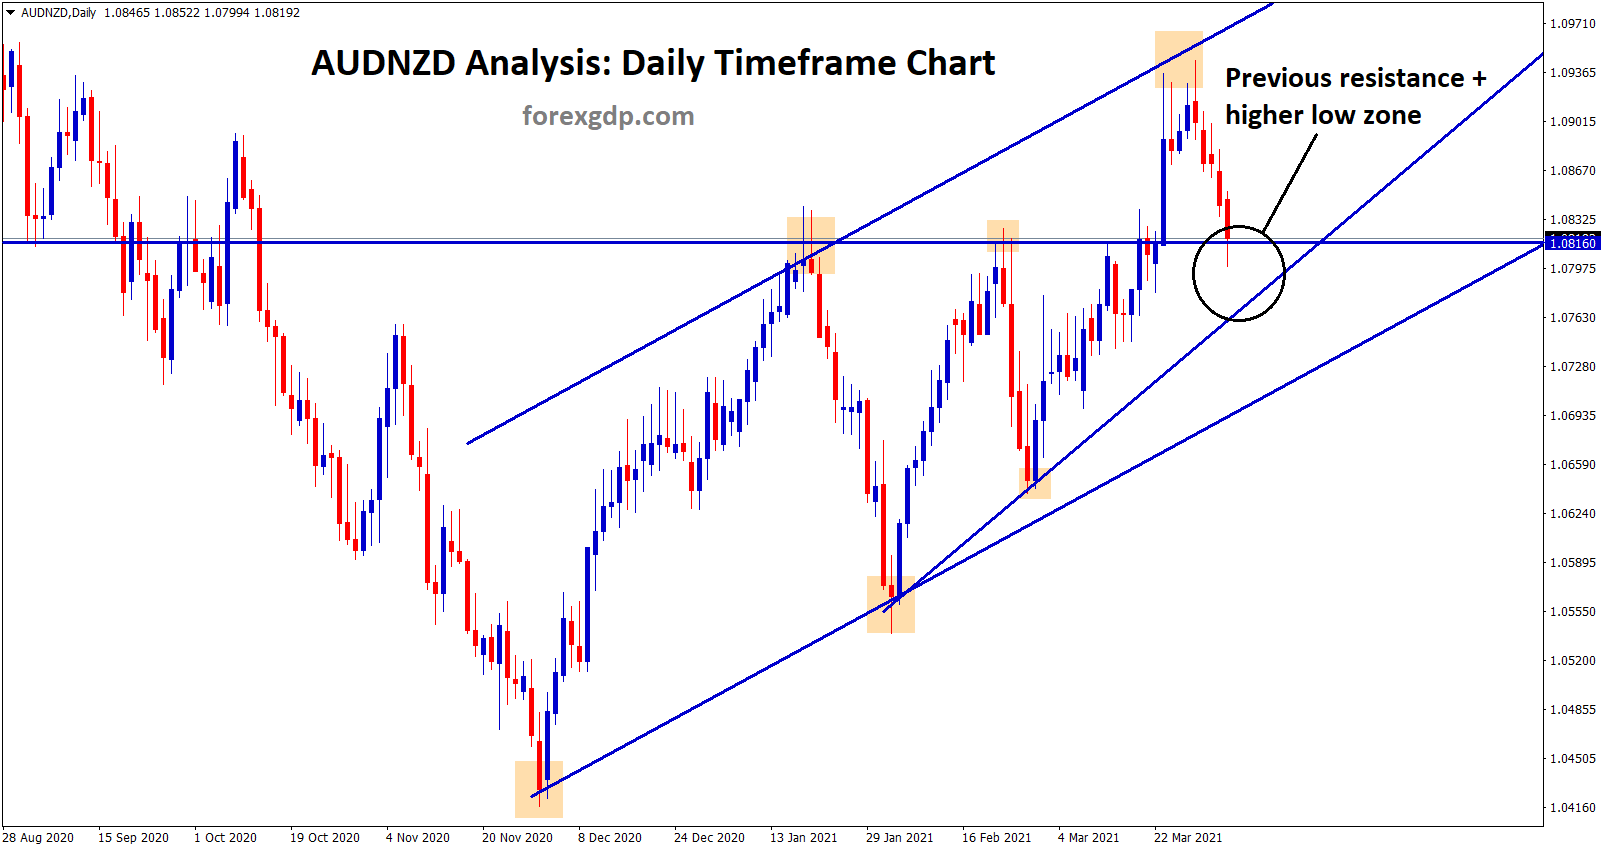 AUDNZD higher low and previous resistance zone